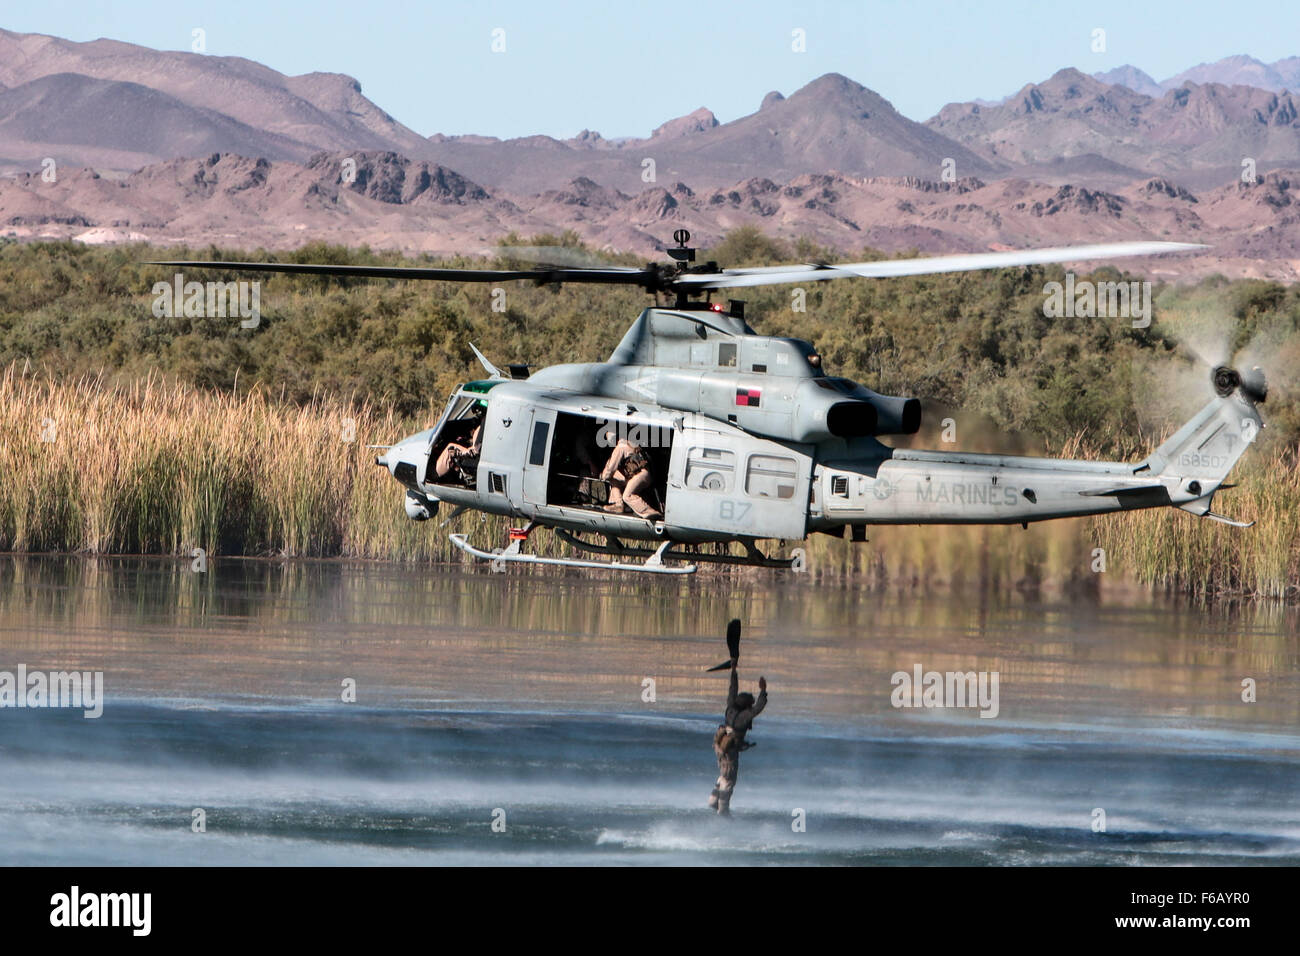 A U.S. Marine with 1st Force Reconnaissance Company, 1st Marine Expeditionary Force conducts a helocast exercise out of a UH-1Y Venom at Ferguson Lake, near Yuma, Ariz., Oct. 3, 2015. The exercise is part of Weapons and Tactics Instructor (WTI) 1-16, a seven-week training event hosted by Marine Aviation Weapons and Tactics Squadron One (MAWTS-1) cadre. MAWTS-1 provides standardized tactical training and certification of unit instructor qualifications to support Marine Aviation Training and Readiness and assists in developing and employing aviation weapons and tactics. (U.S. Marine Corps photog Stock Photo